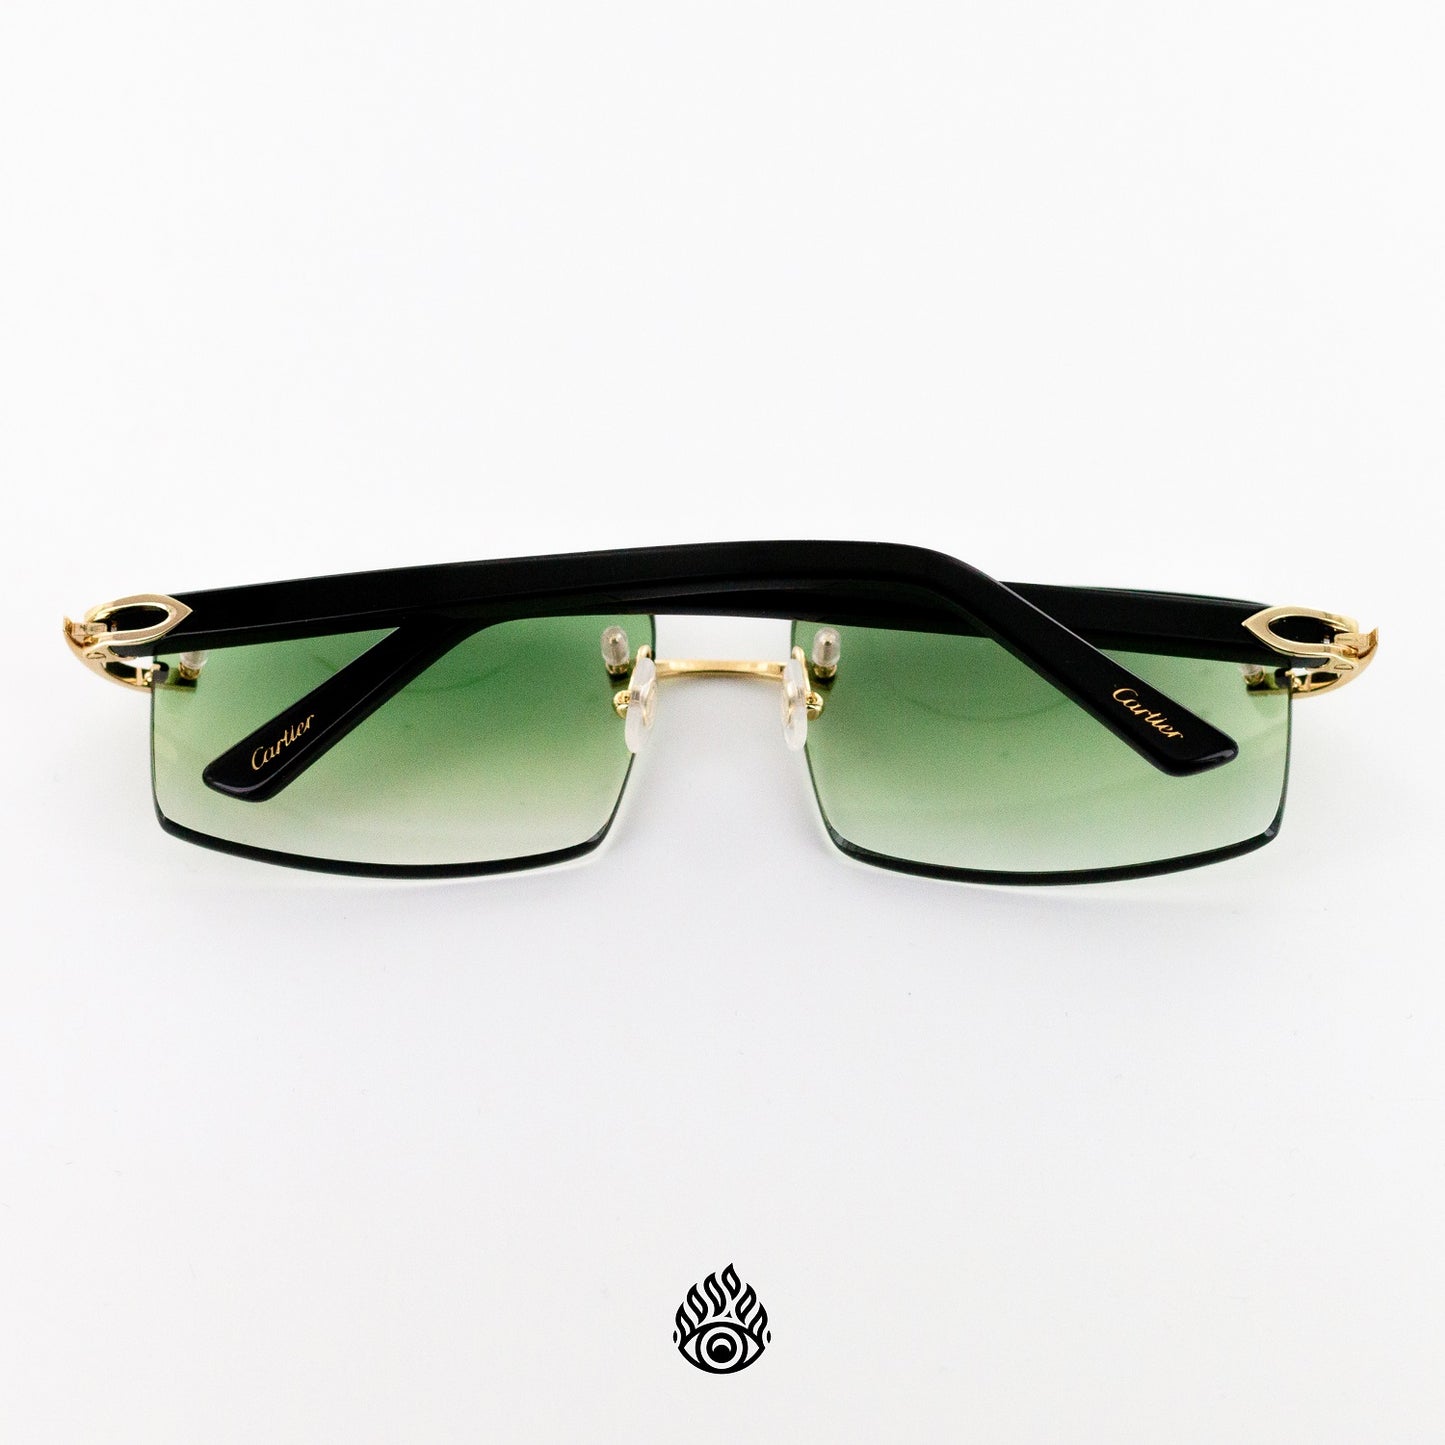 Cartier Black Acetate Glasses with Gold C Decor & Green Lens